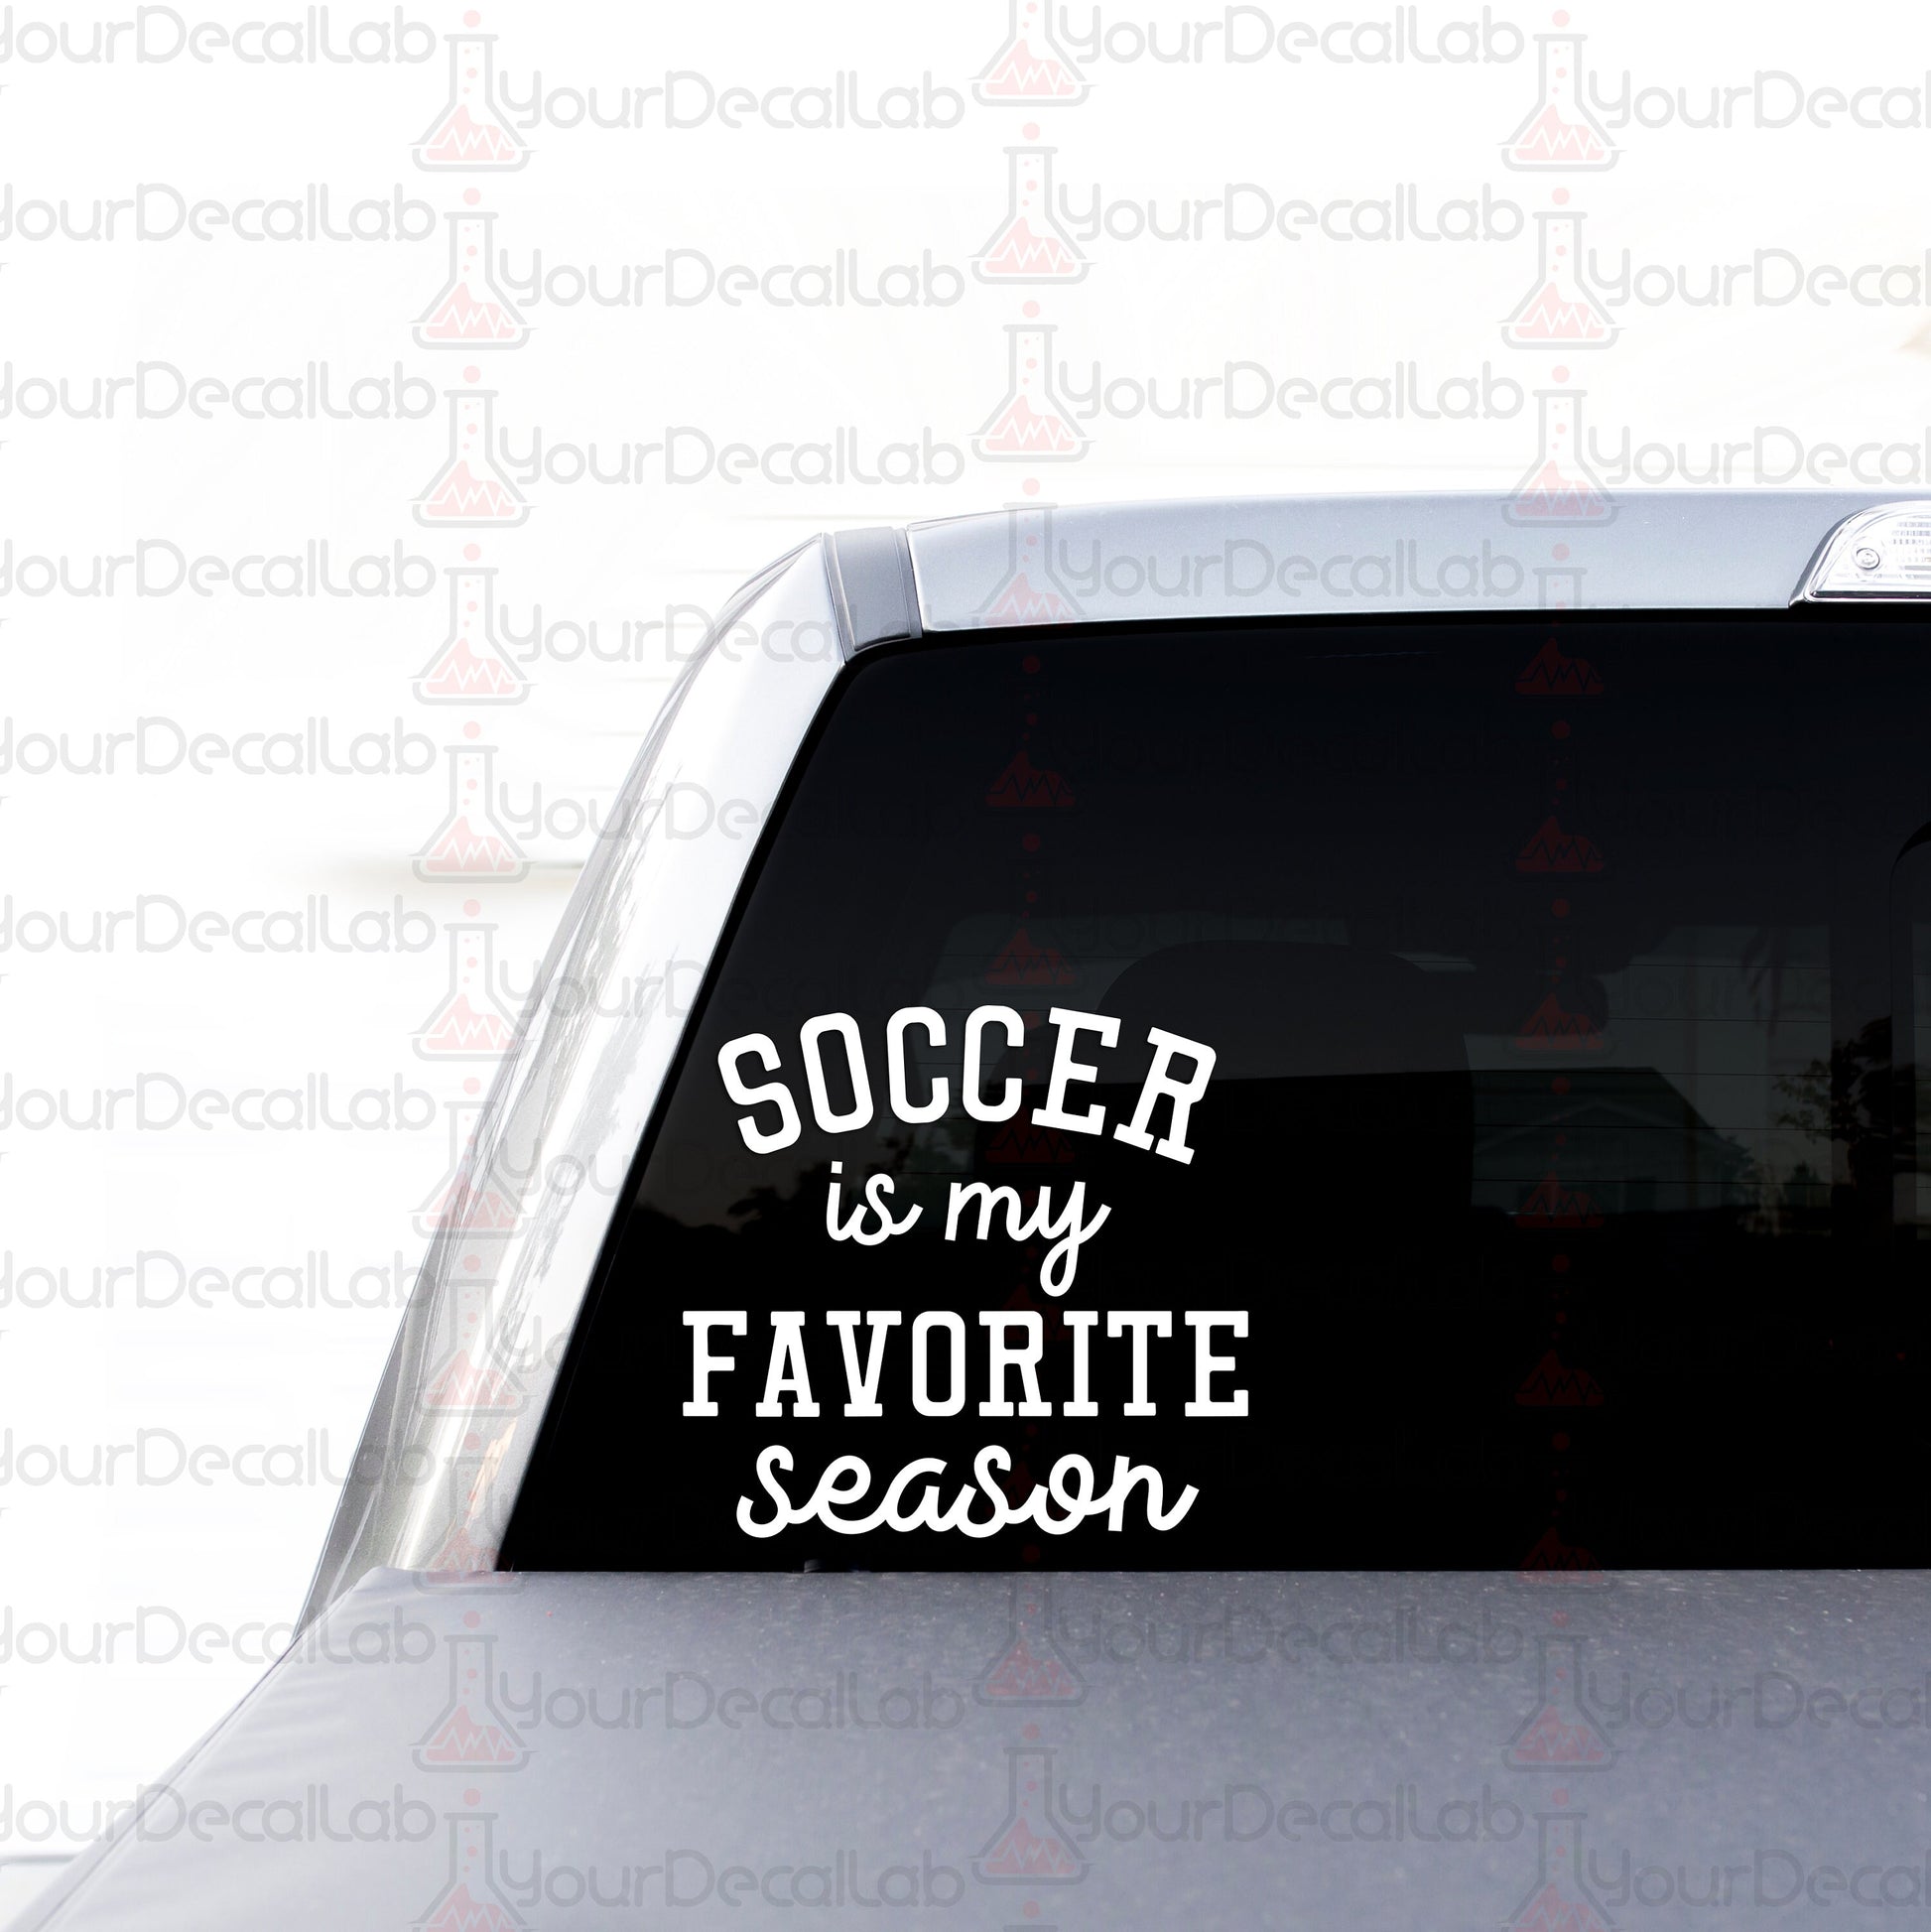 a sticker that says soccer is my favorite season